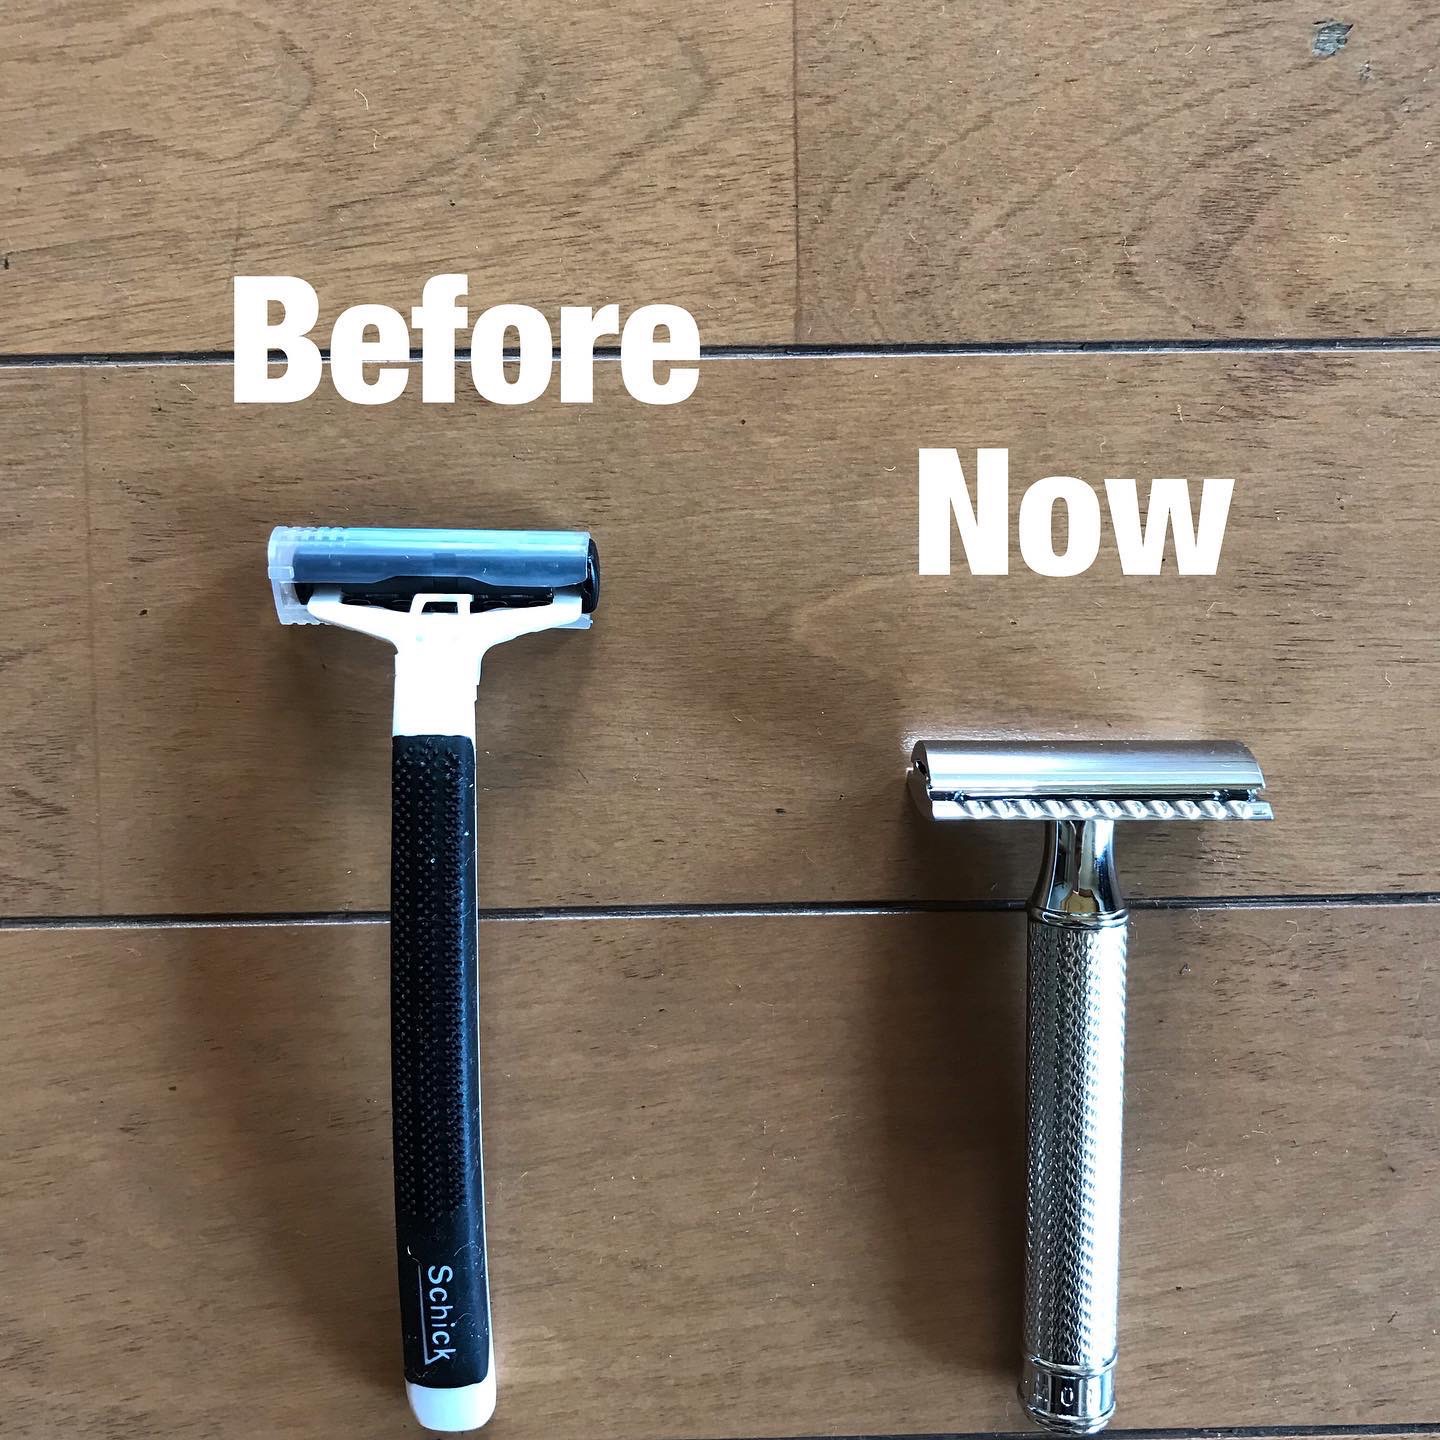 I wanted to save money on disposable razors & cut back on plastic waste while getting a close shave? I use safety razor on my legs & underarms now. I am happy I made the switch now. It does a better job than my disposable blades and it makes me feel better knowing that I'm not tossing more plastic into landfills?